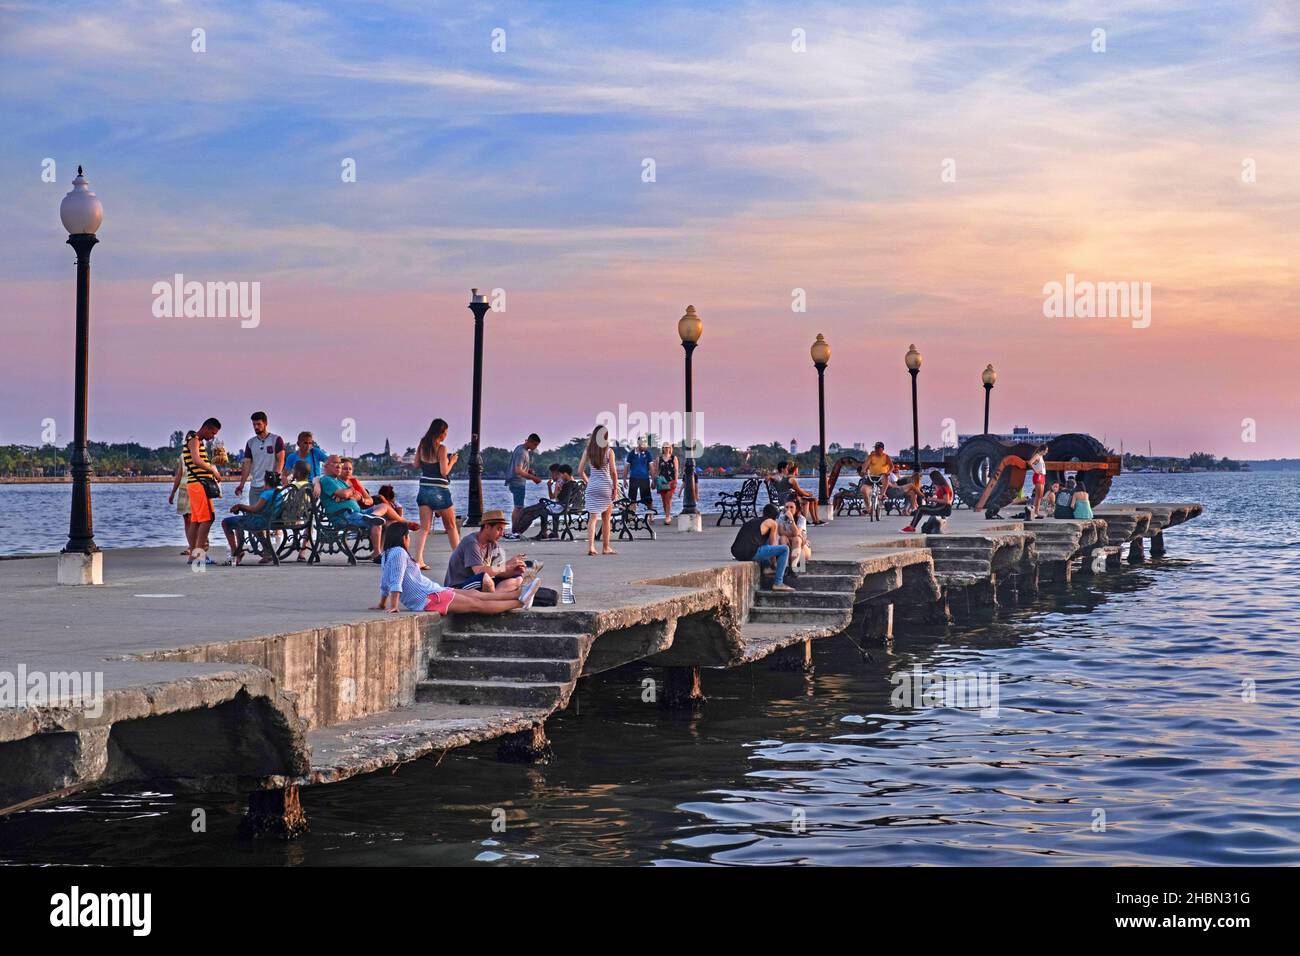 Cubans and tourists sitting on the concrete Muelle Real / Royal Pier at sunset in the city Cienfuegos on the island Cuba, Caribbean Sea Stock Photo